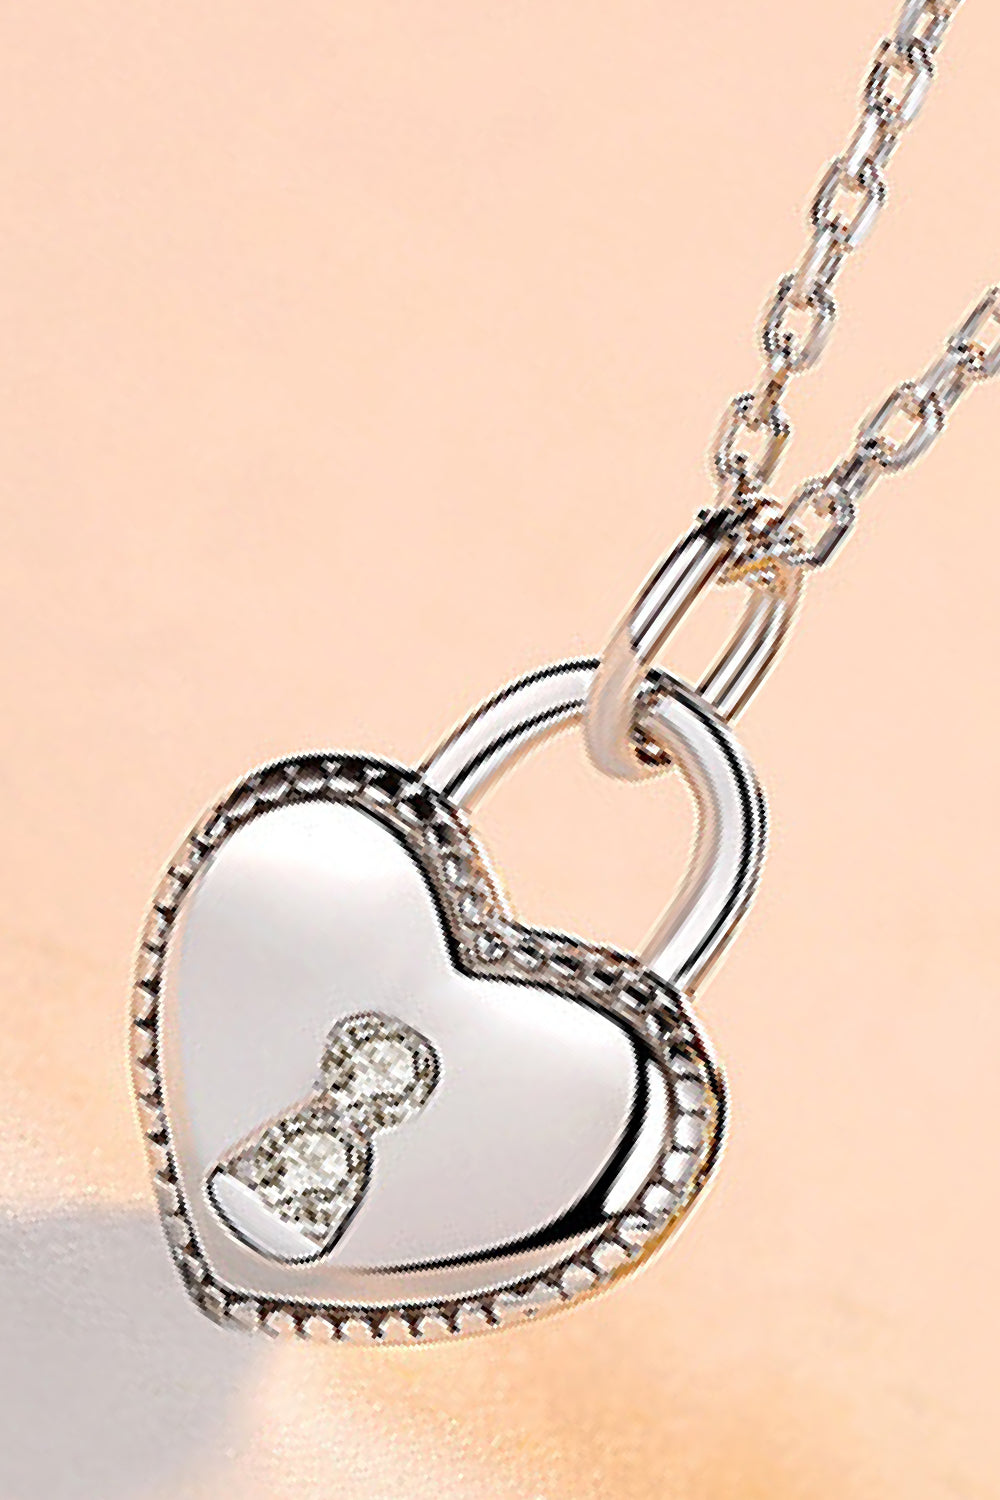 Uylee's Boutique Heart Lock Pendant 925 Sterling Silver Necklace